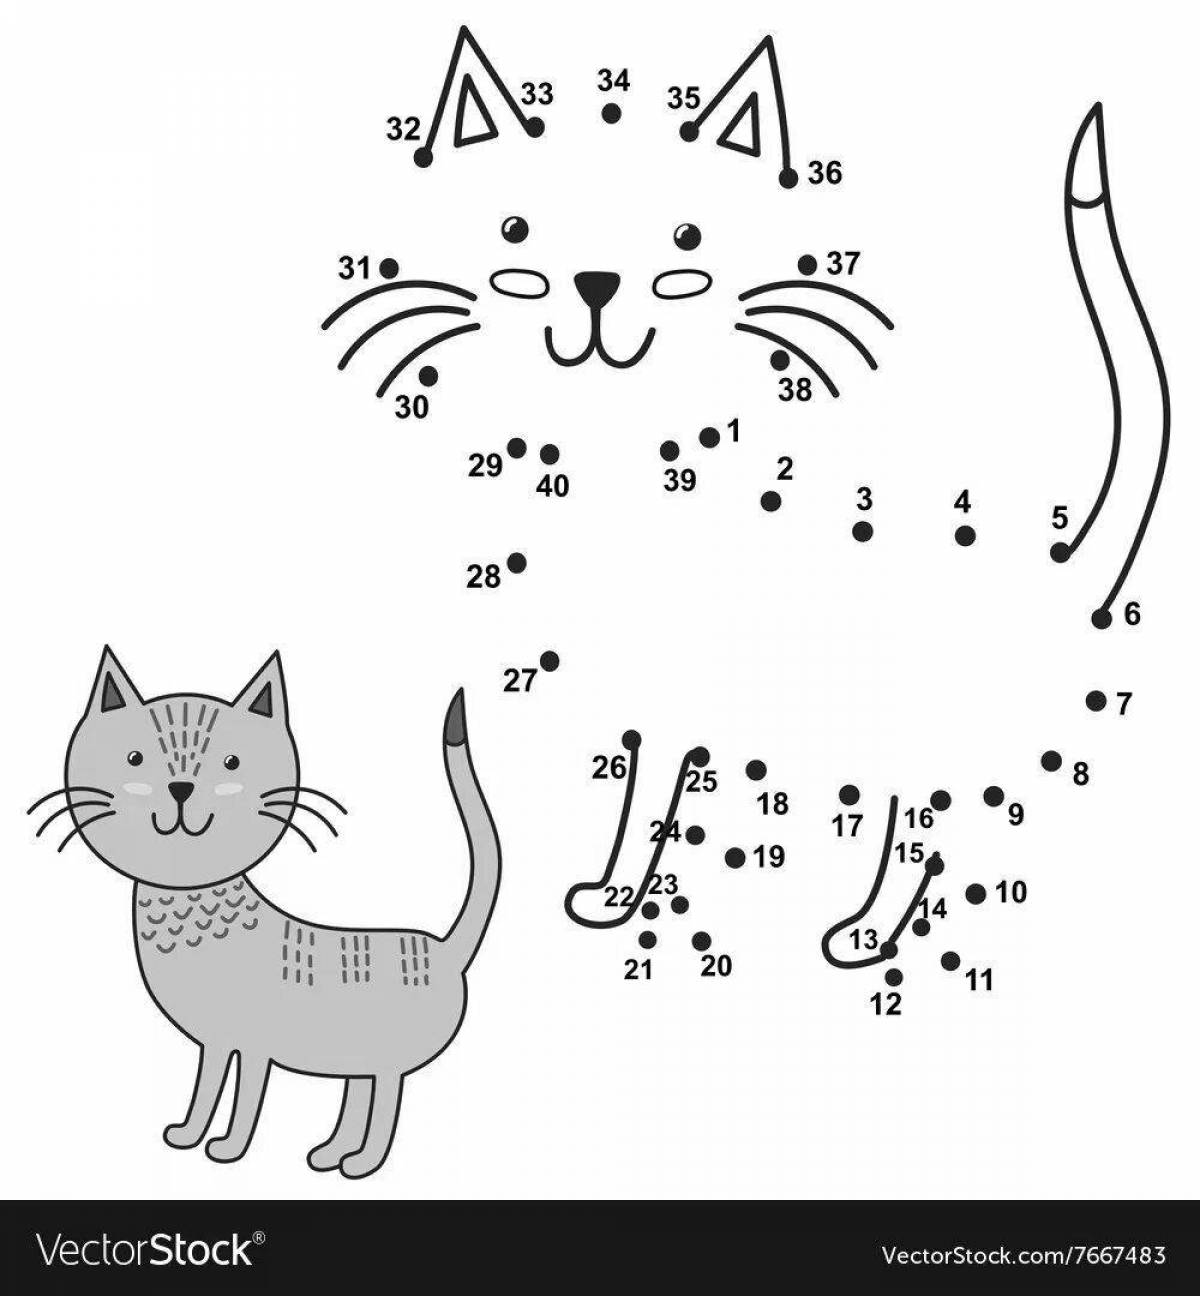 Coloring page playful dotted cat